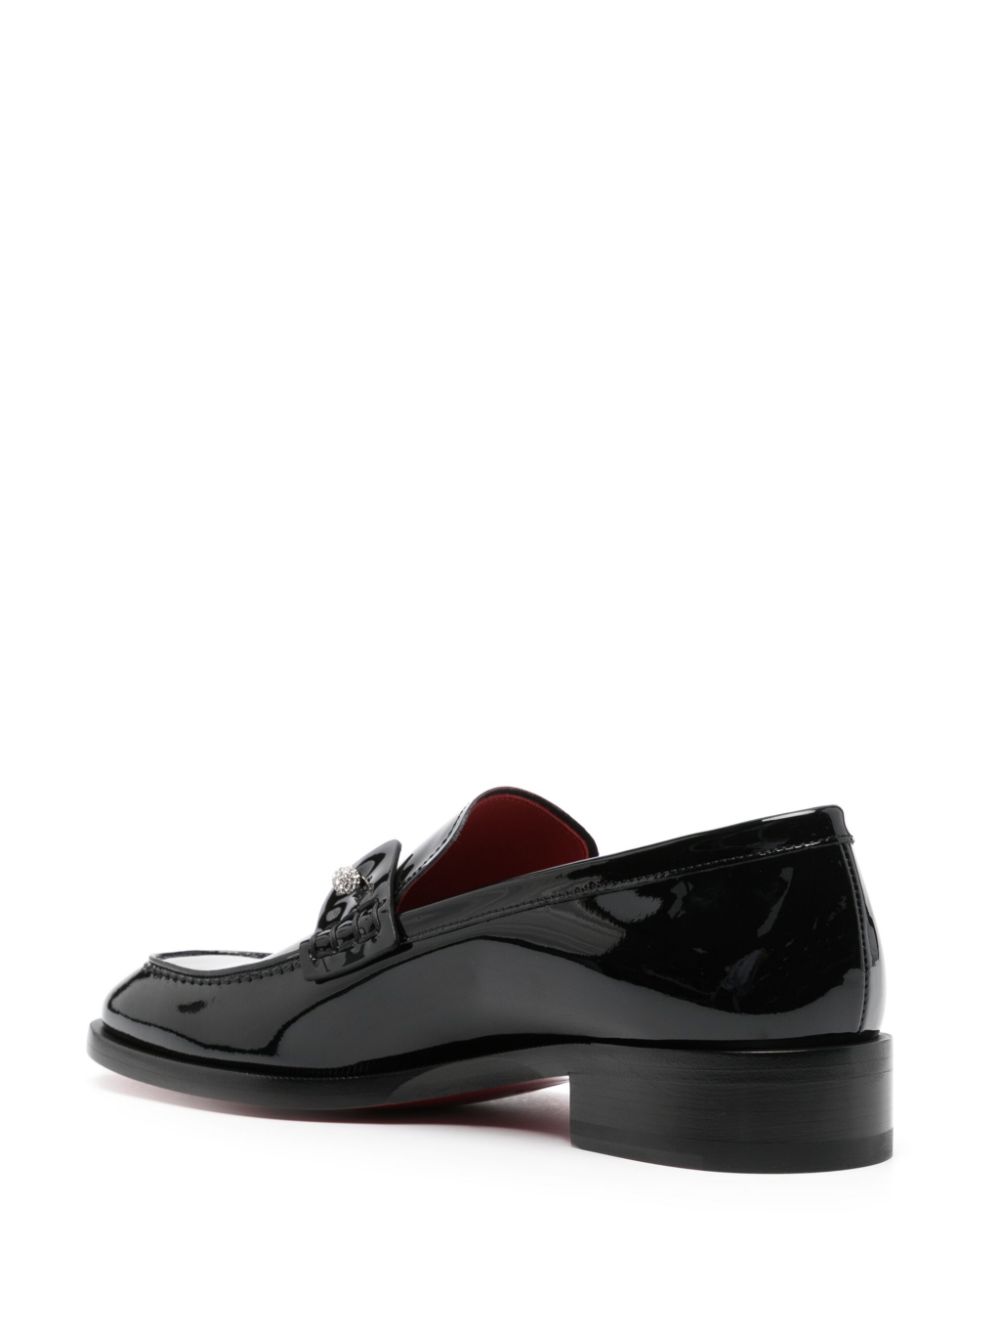 Black Leather Moccasins with Rhinestone Embellishment and Signature Red Sole for Men